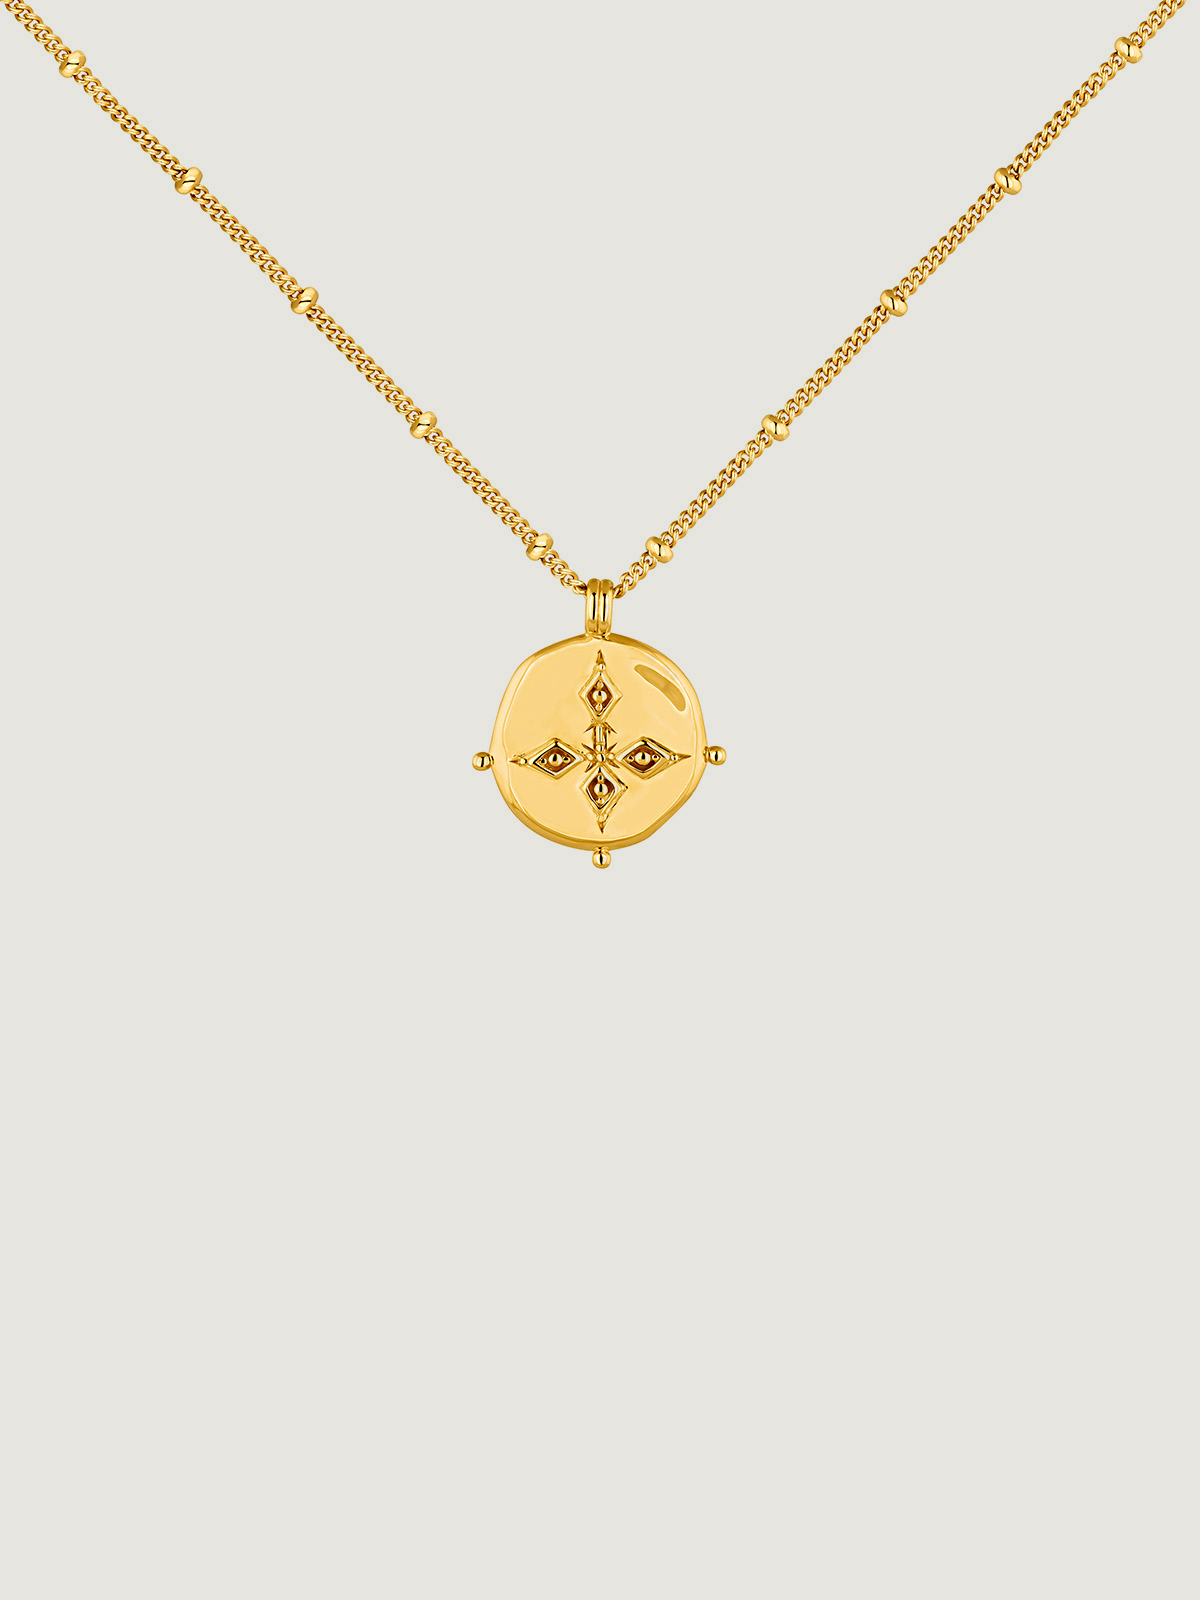 925 Silver pendant bathed in 18K yellow gold with an antique style medallion